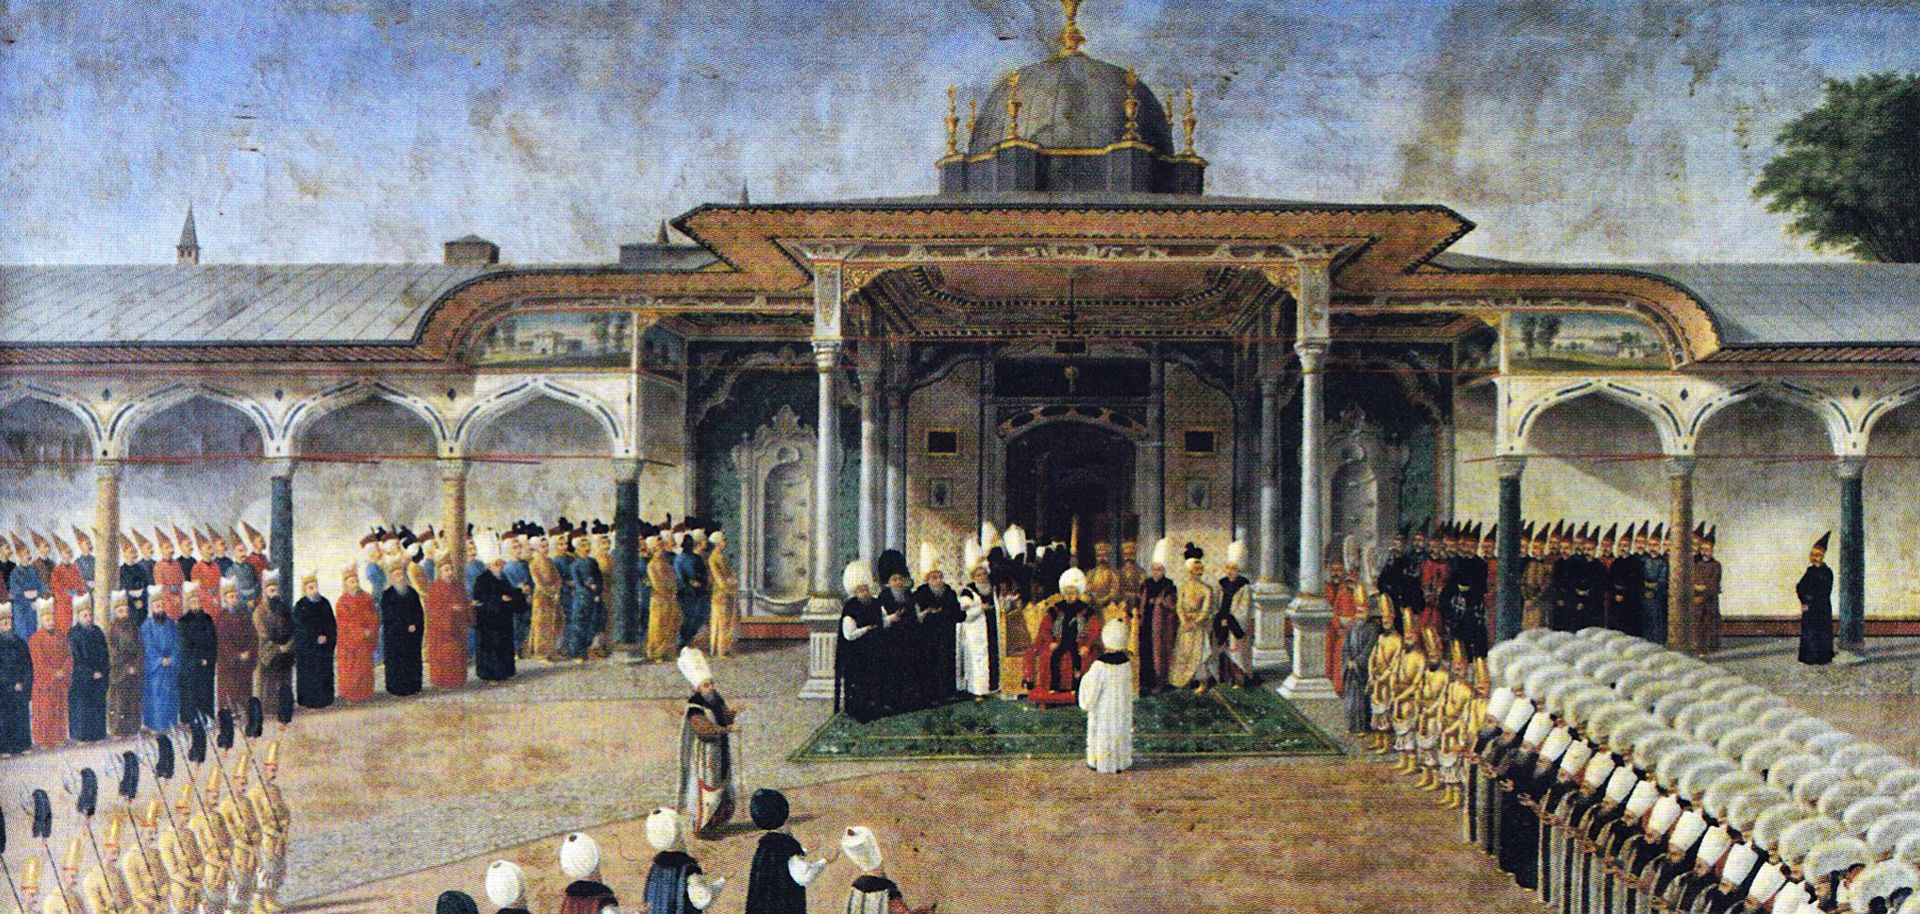 Selim III, the sultan of the Ottoman Empire in 1789-1807, holds court in front of the Gate of Felicity at Topkapi Palace in Istanbul.